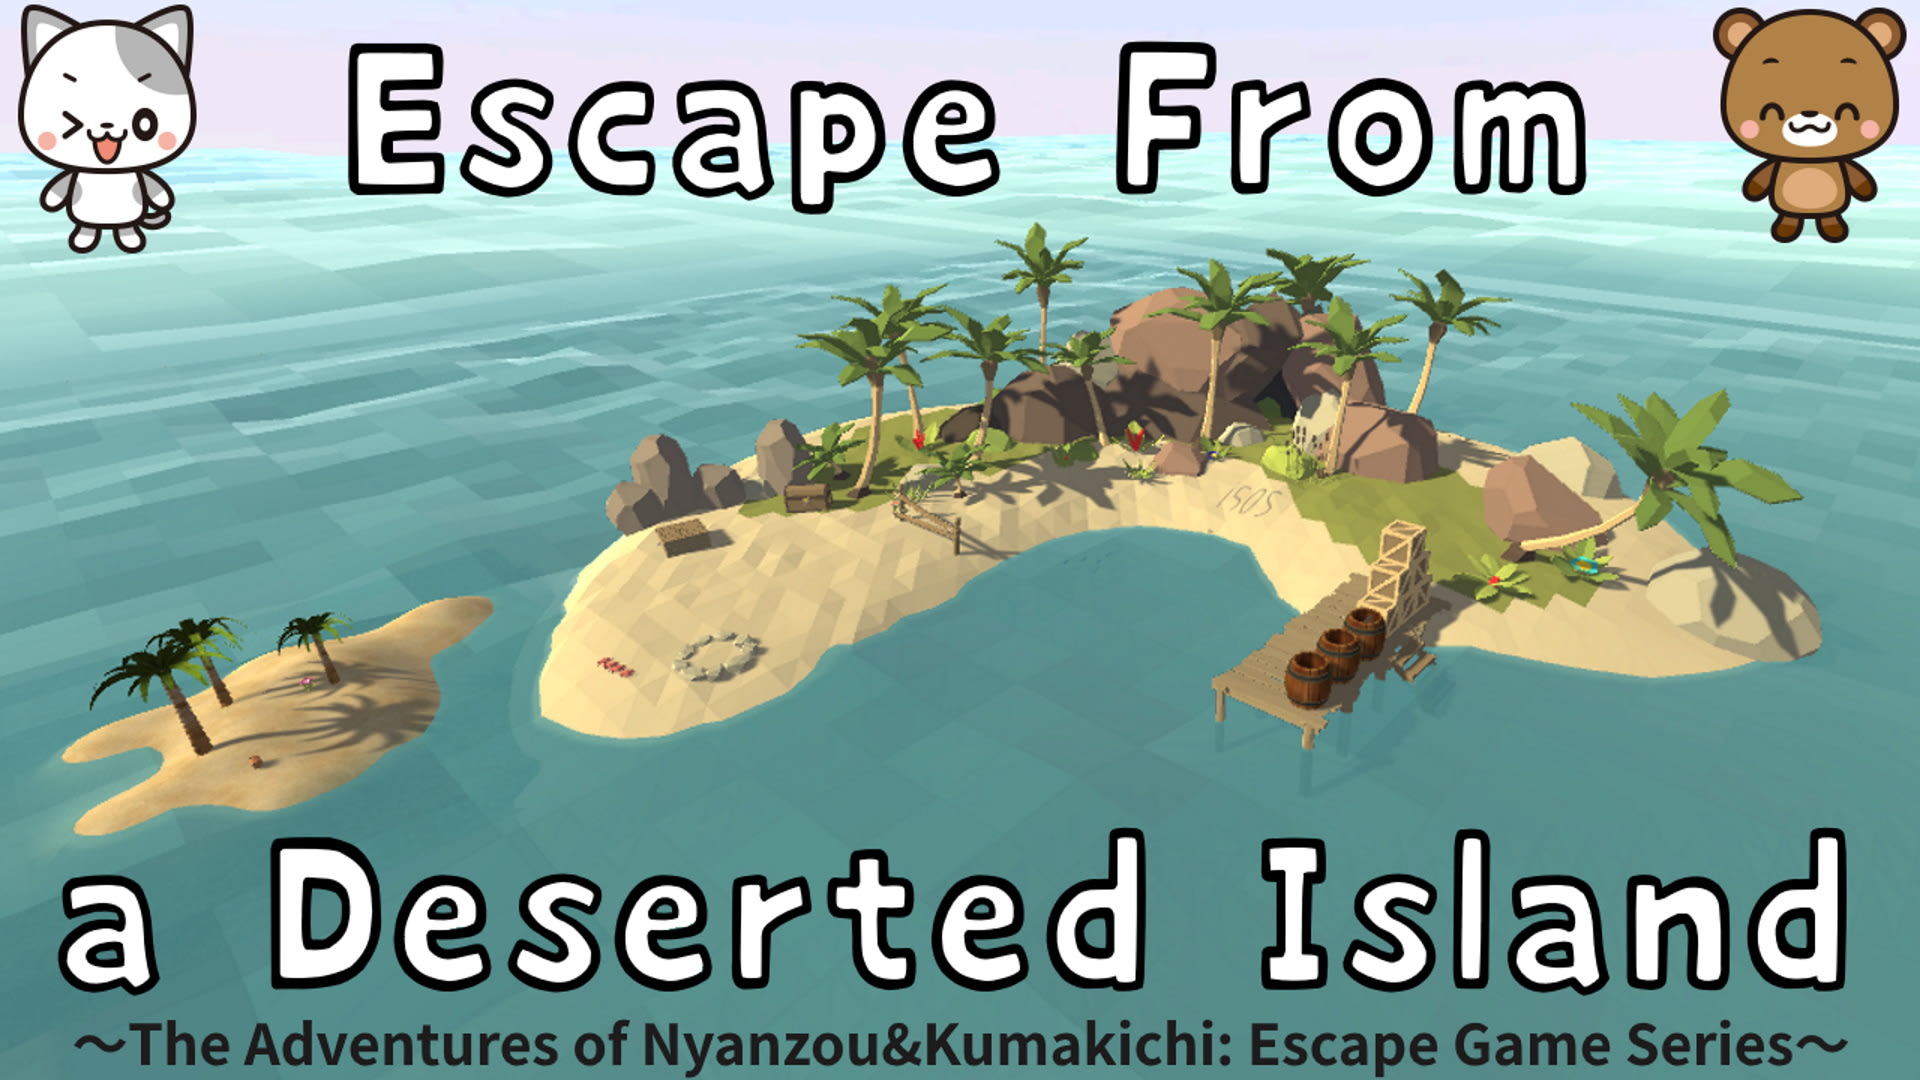 Escape From a Deserted Island
～The Adventures of Nyanzou&Kumakichi: Escape Game Series～ 1